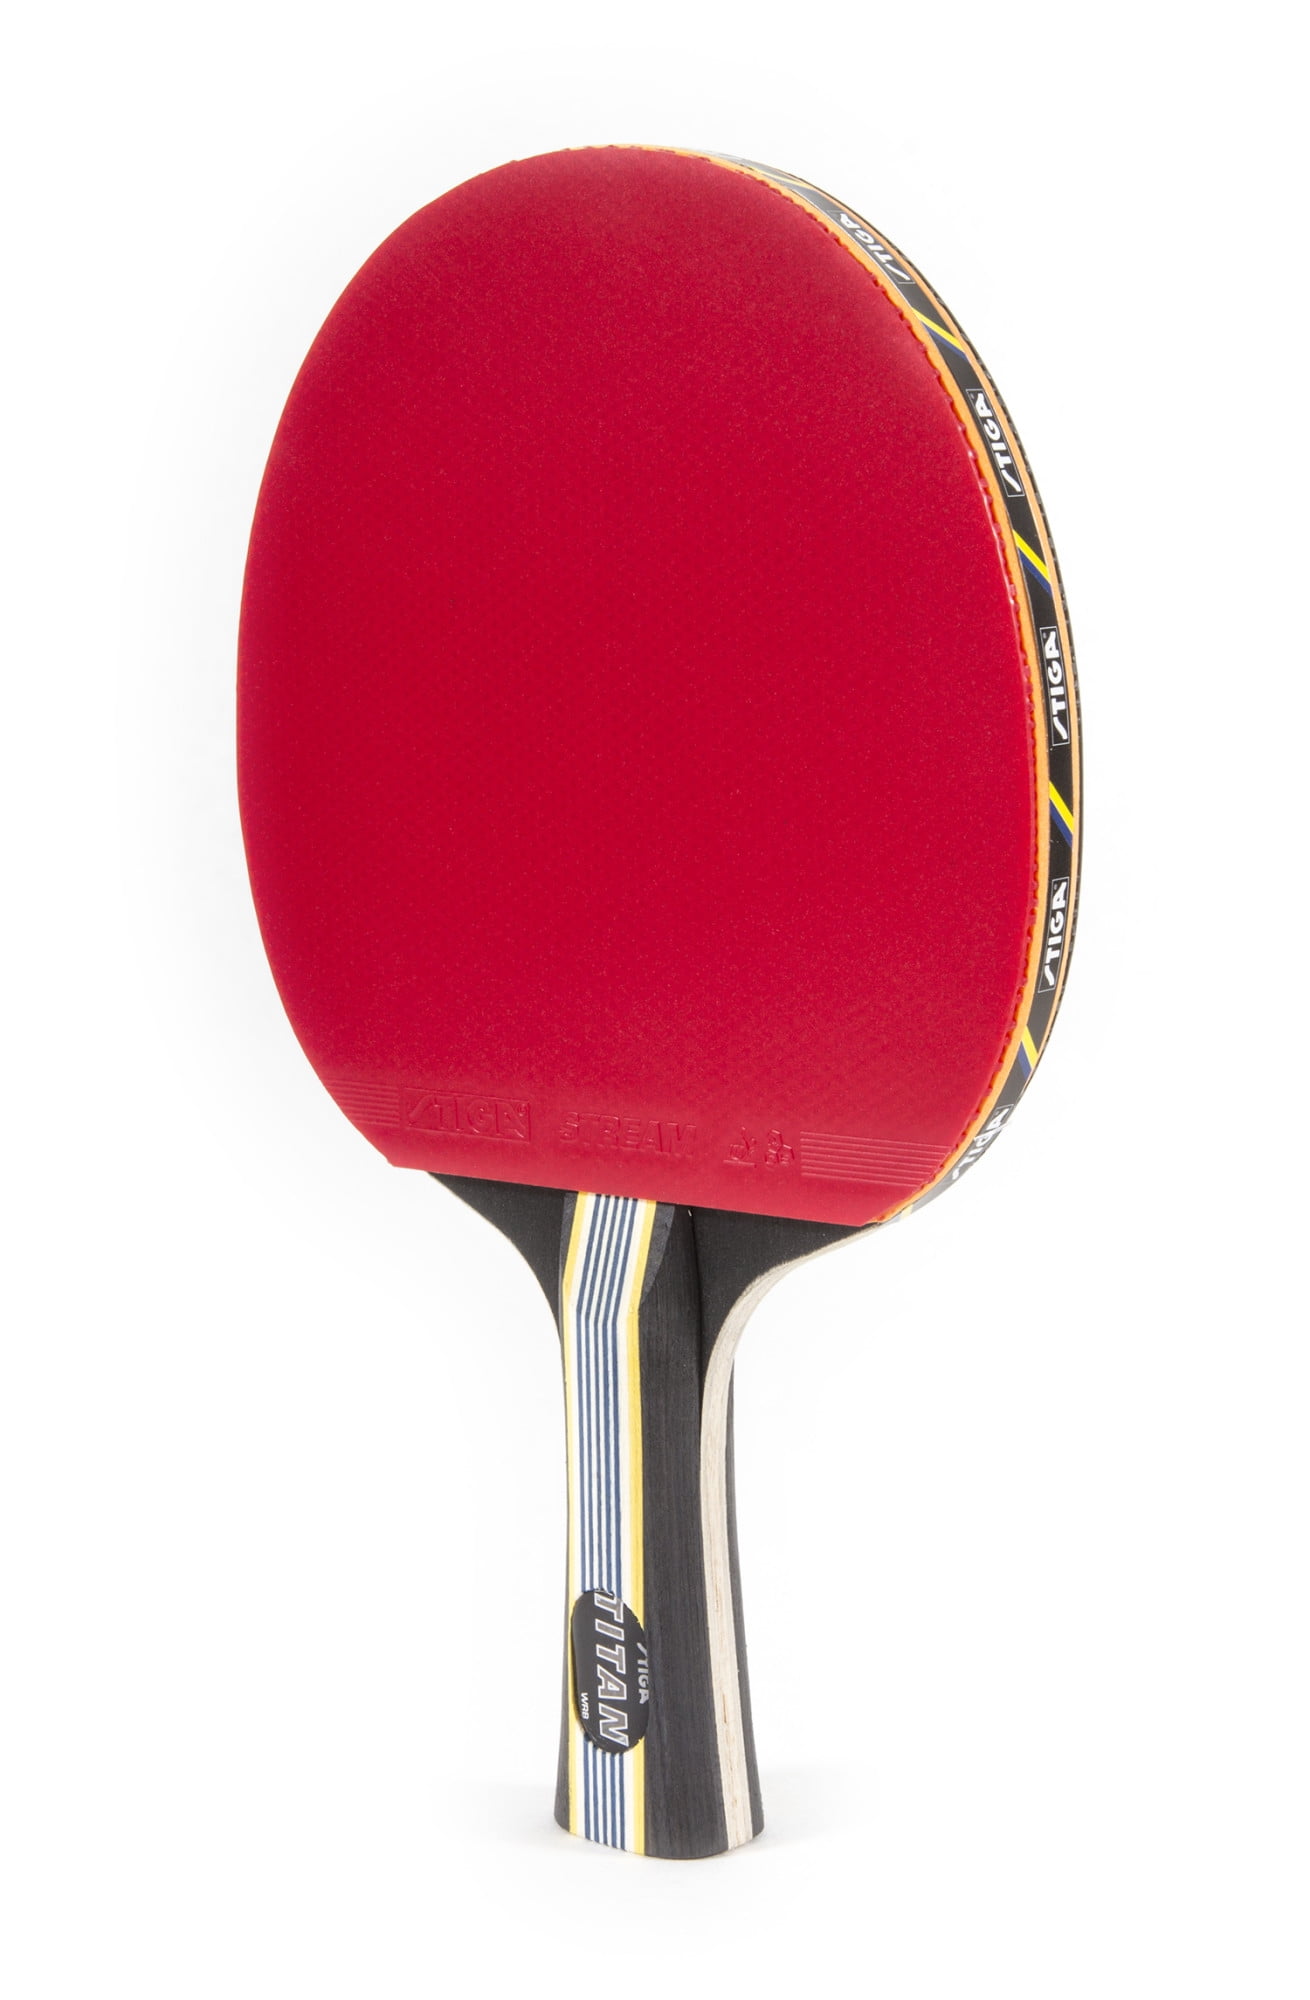 Temagami Tennis Racquet Cover – PARK Accessories